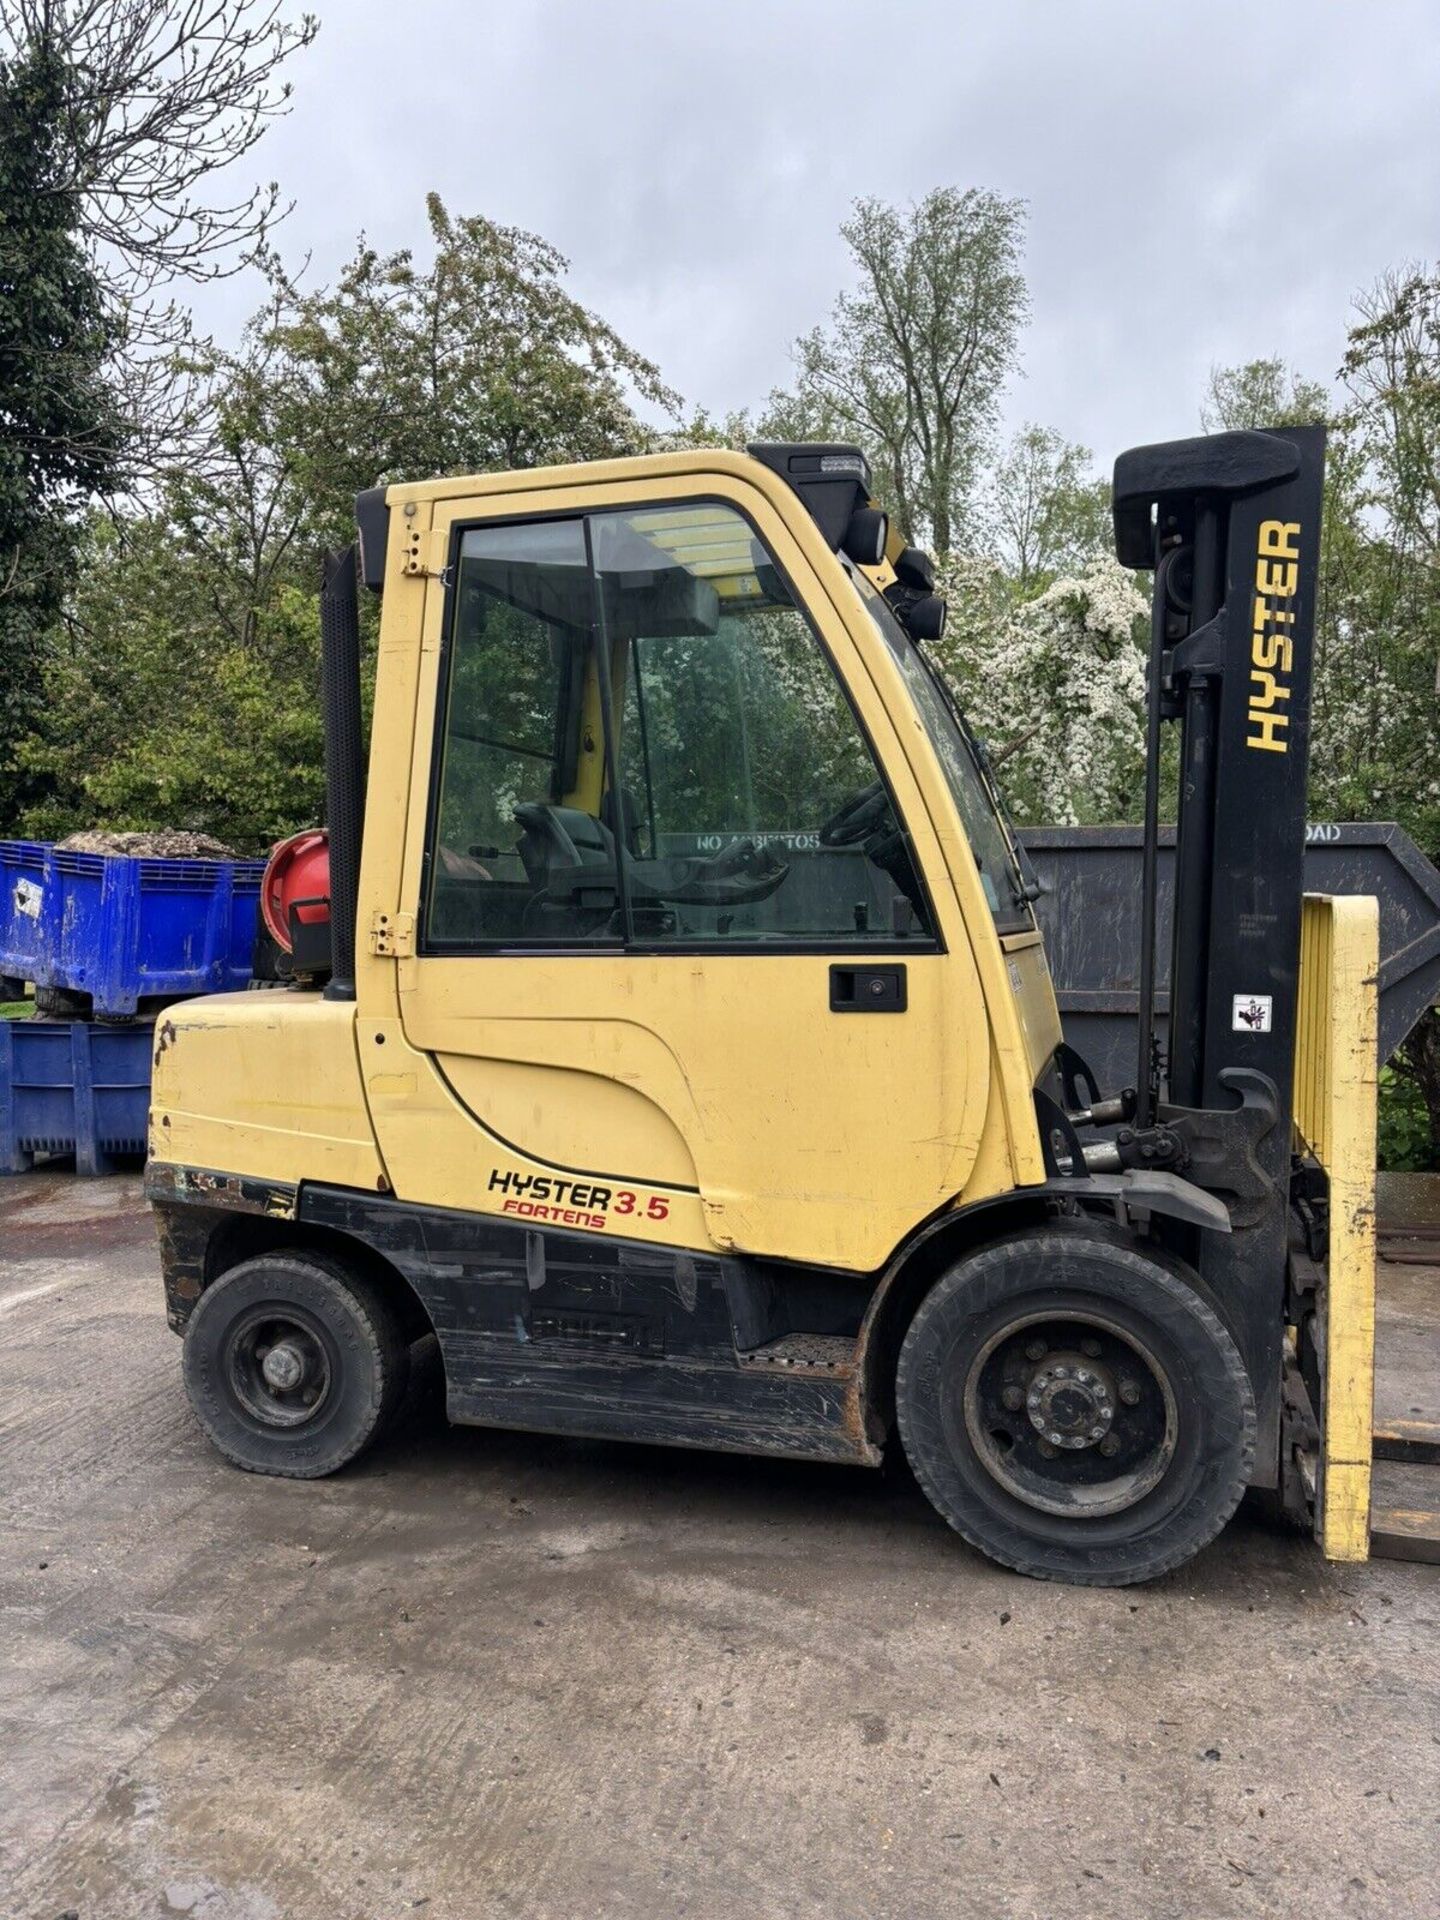 2014 - HYSTER, Gas Forklift Truck (3000 hours)